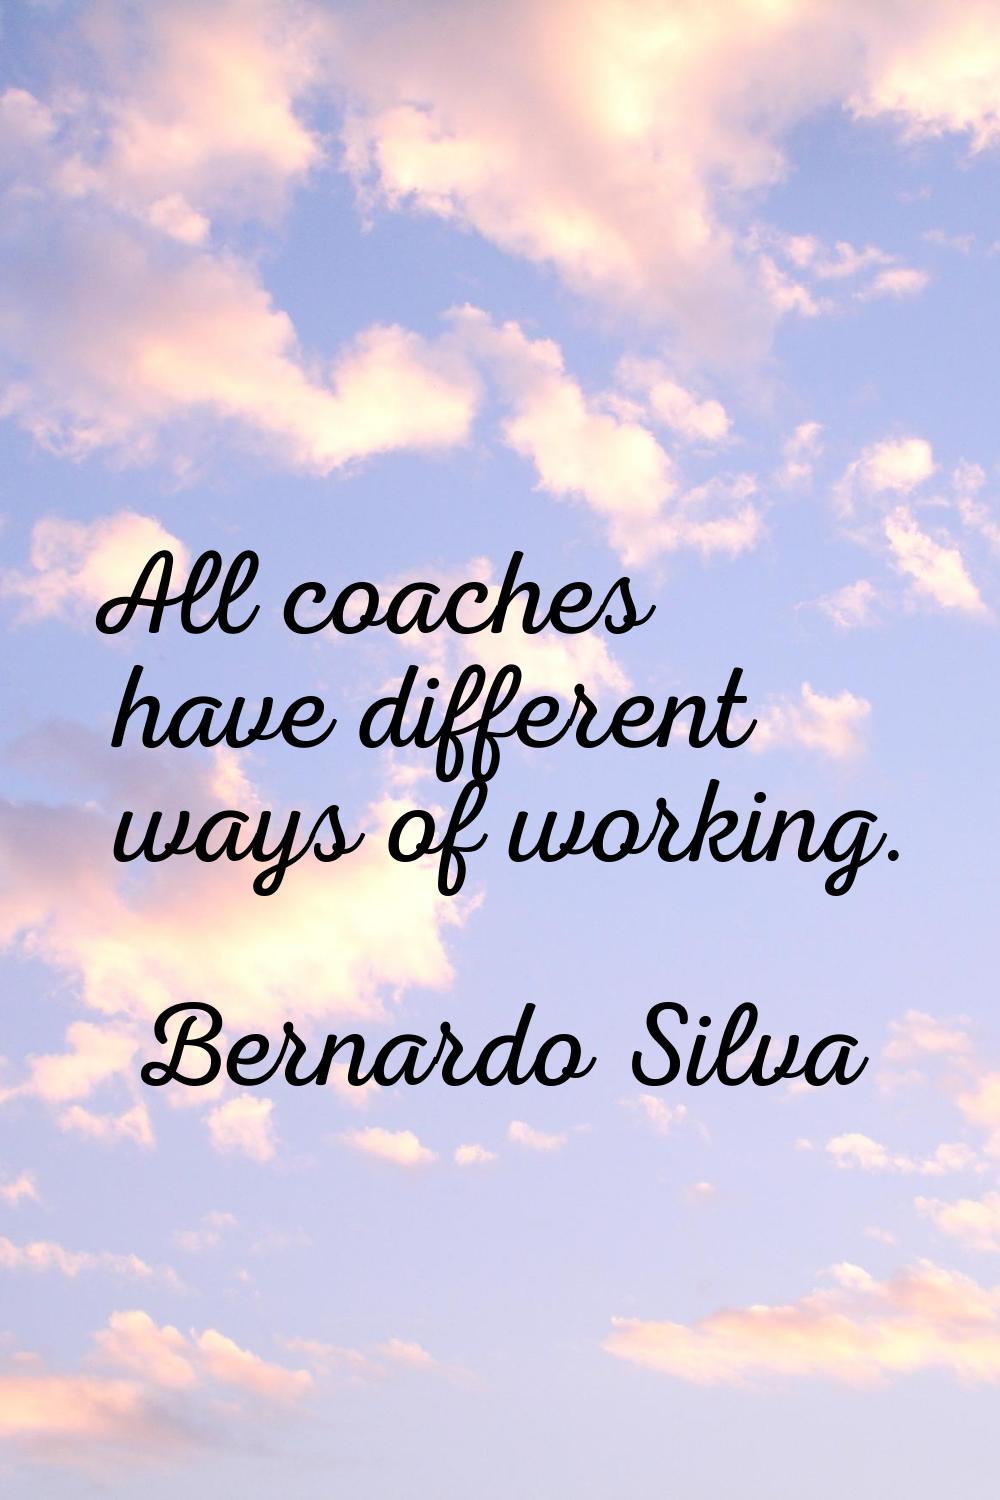 All coaches have different ways of working.